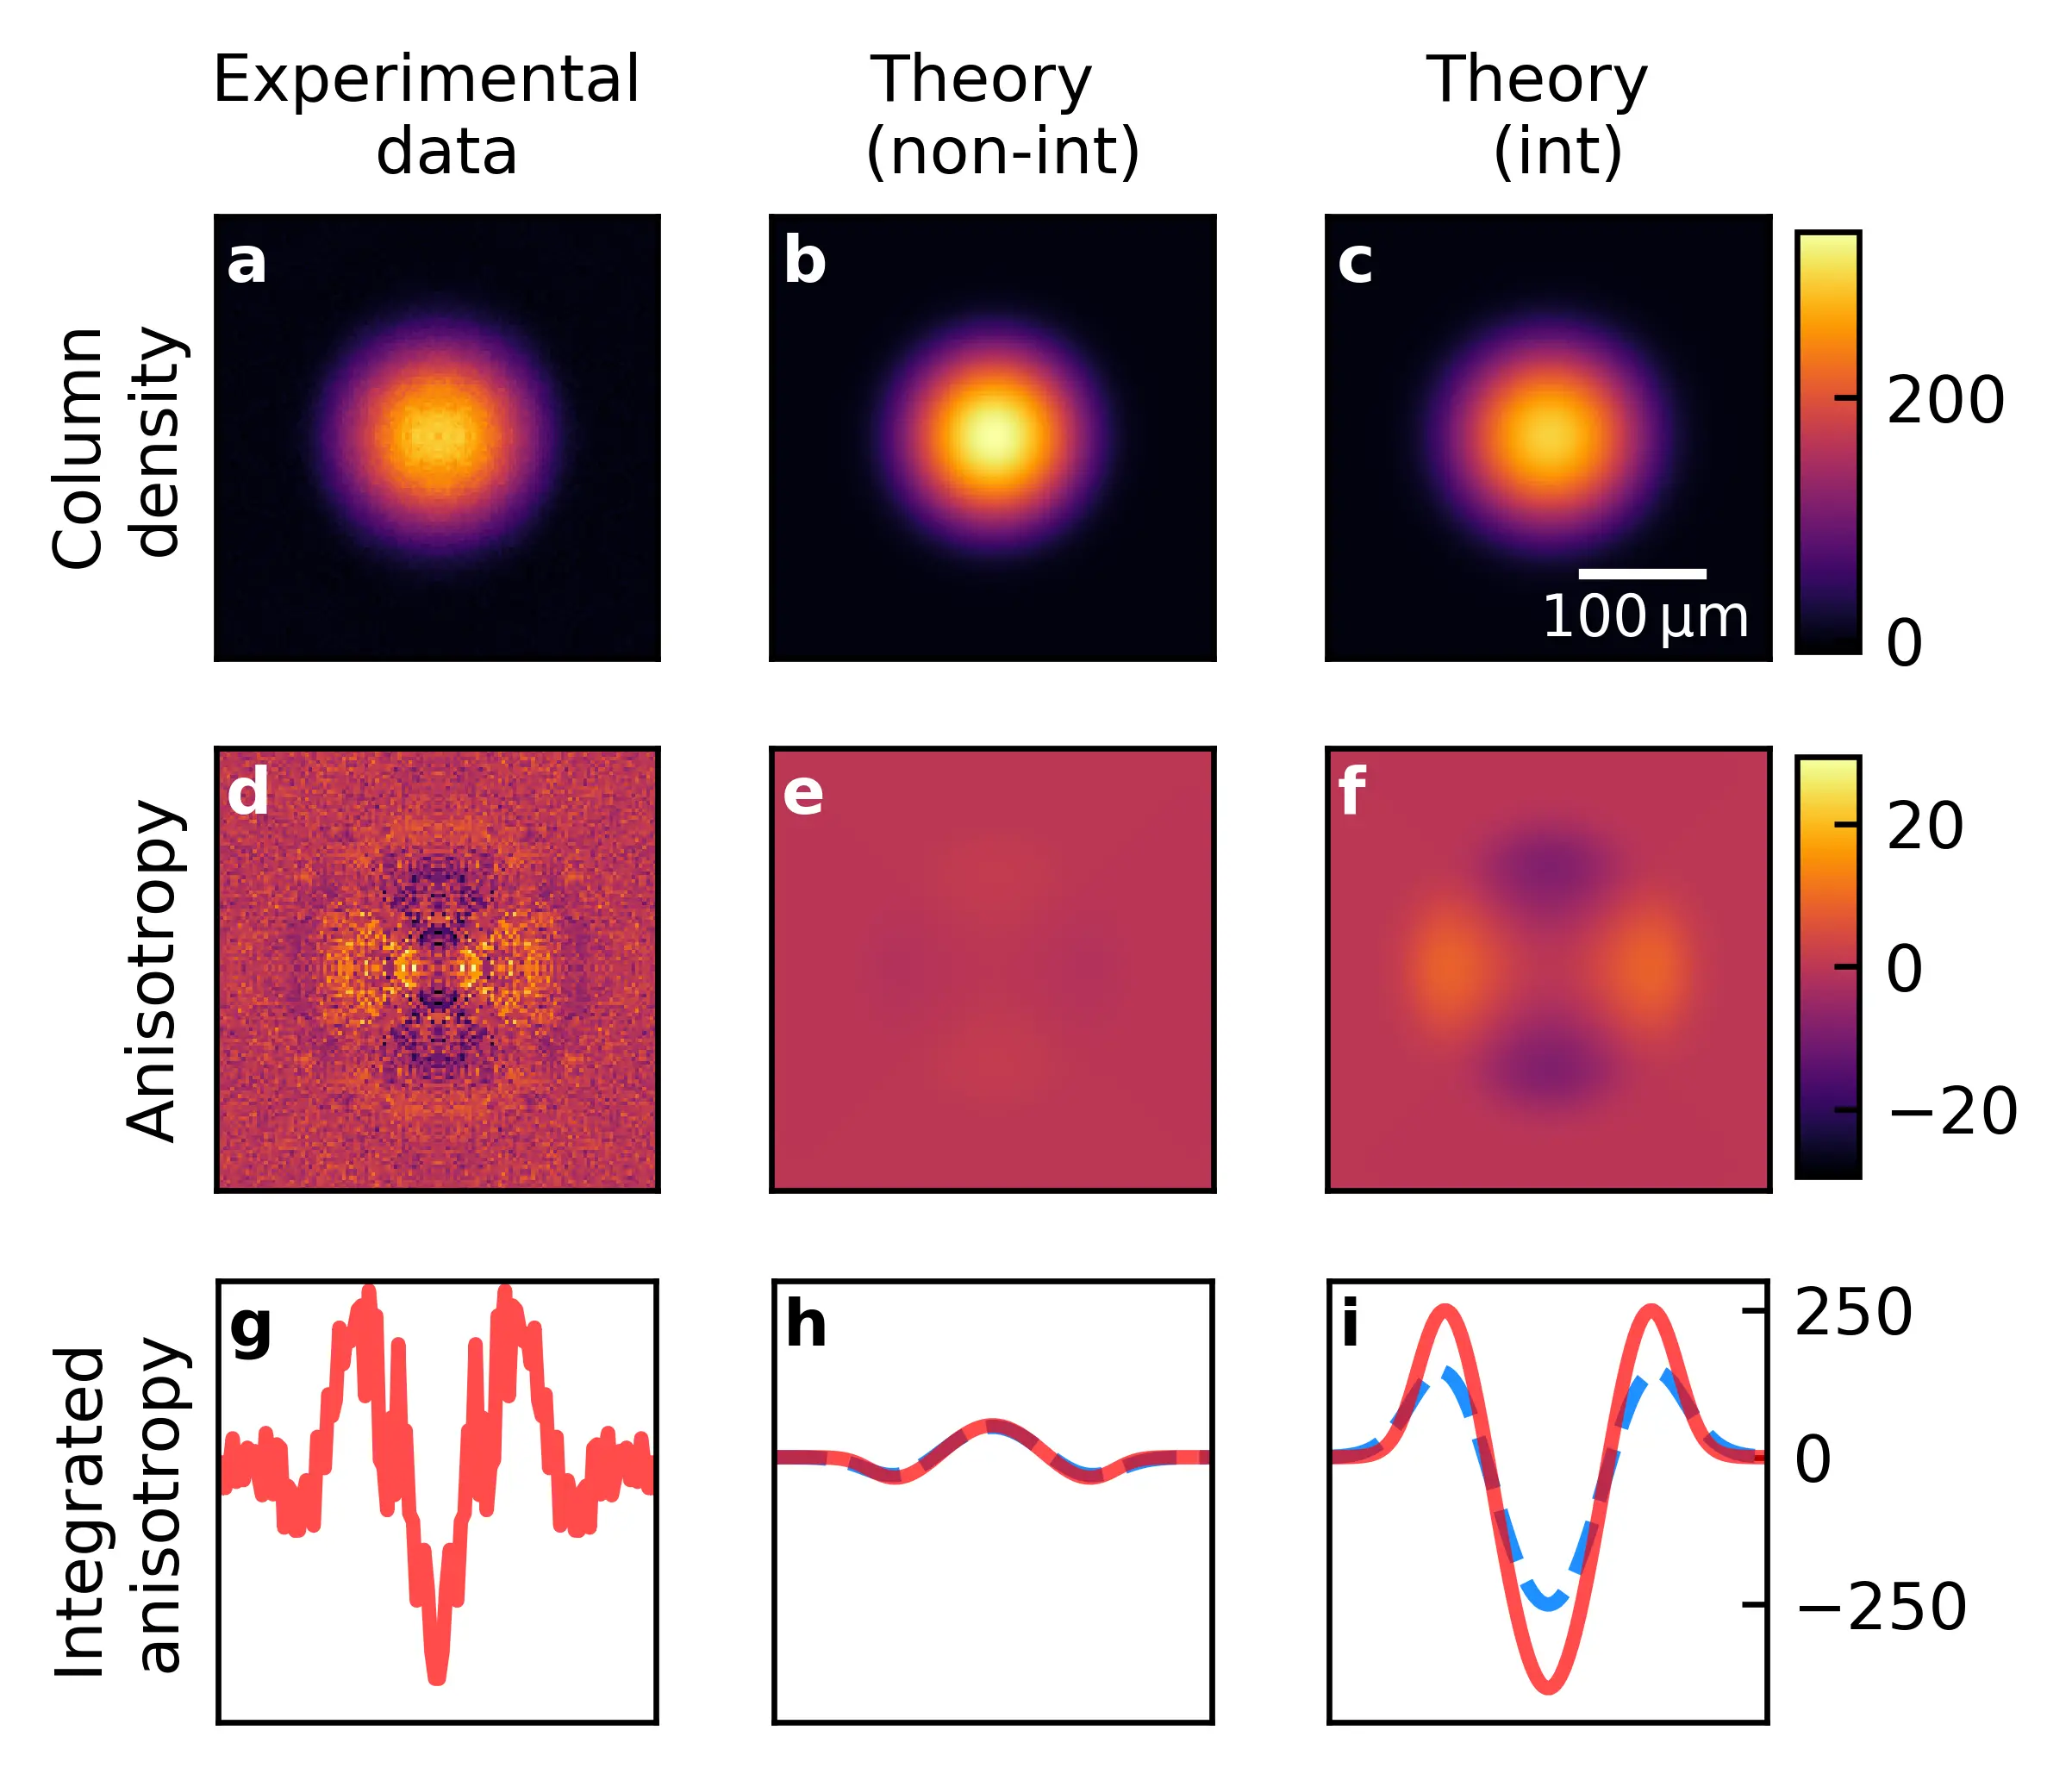 Comparison of time-of-flight images for interacting SU(N) and non-interacting Fermi gases